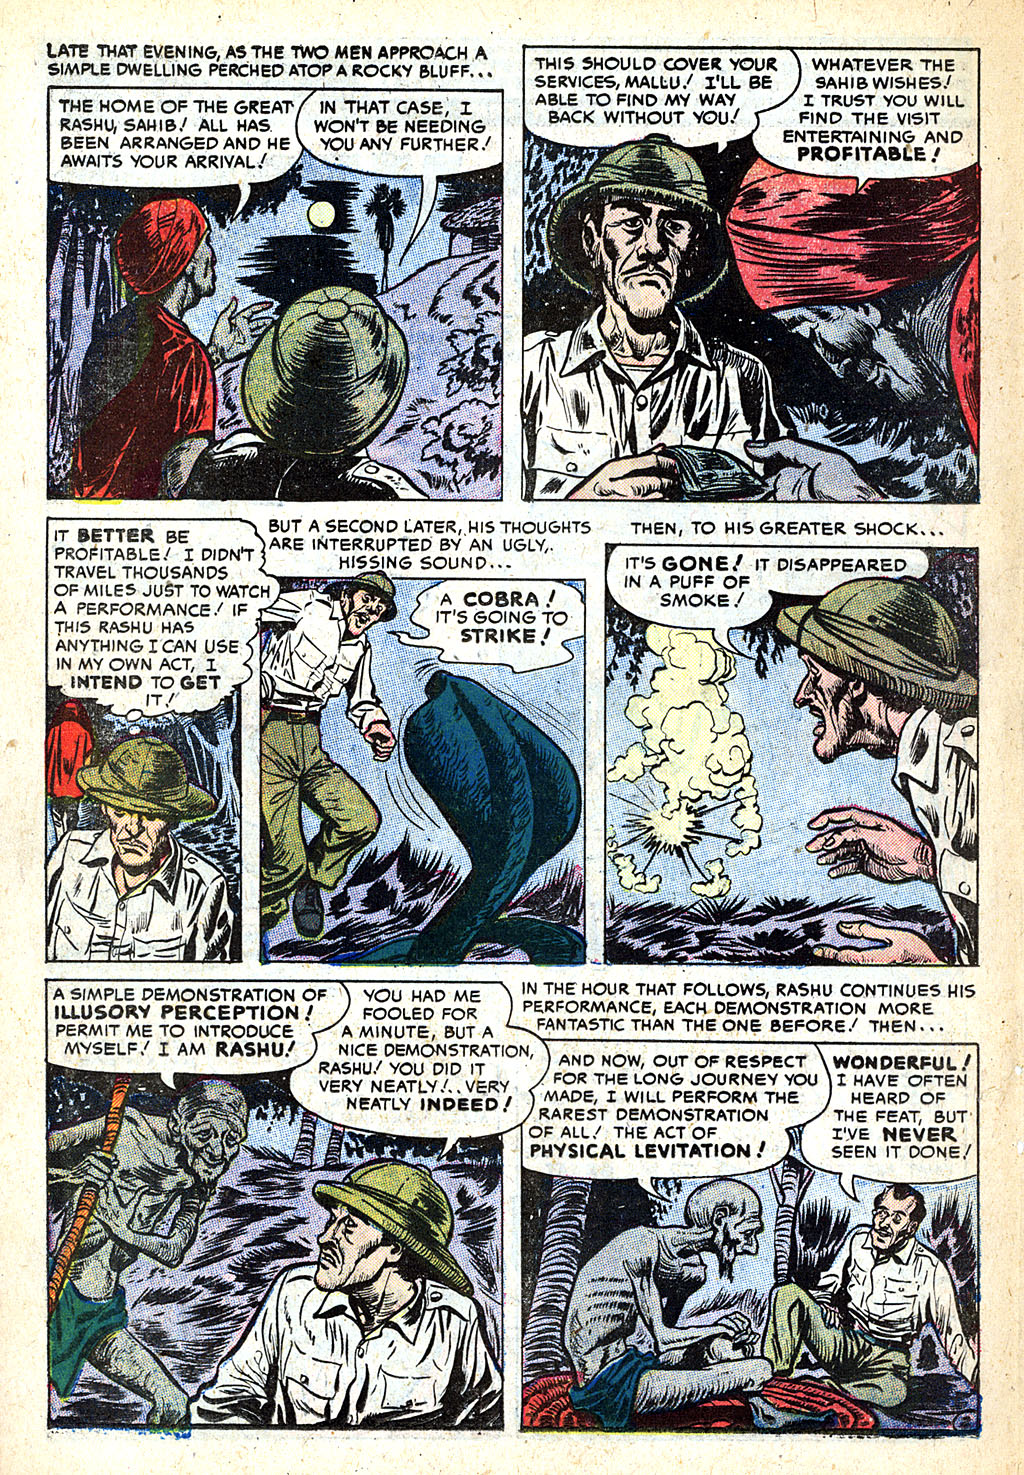 Marvel Tales (1949) 118 Page 23